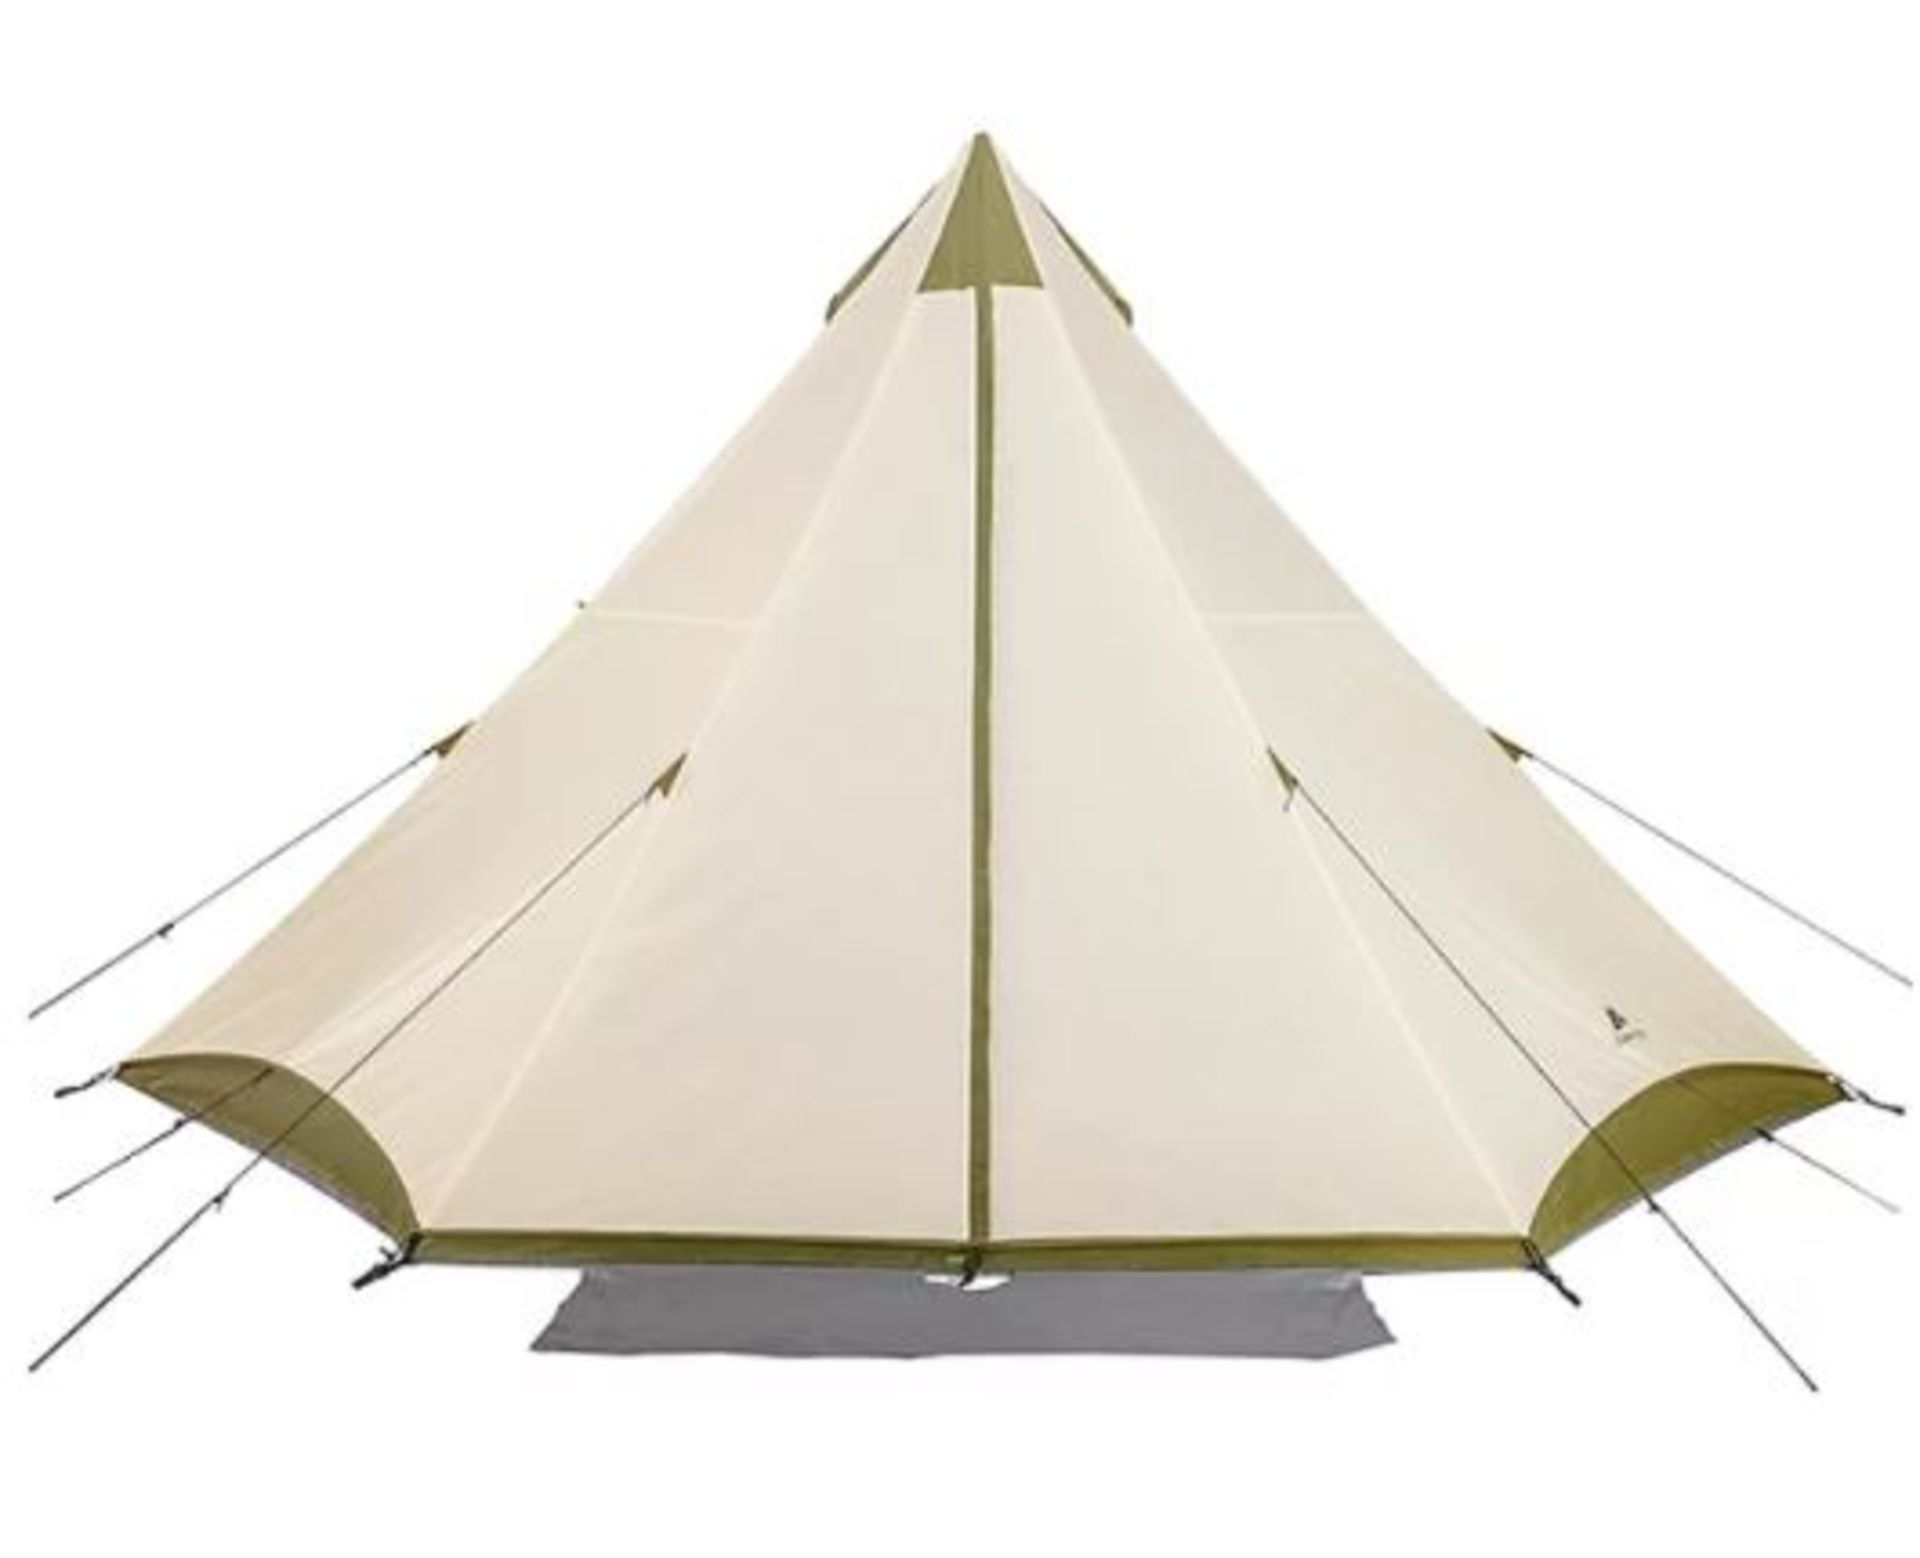 (2K) 1x Ozark Trail 8 Person Teepee Tent RRP £89. (Contents Not Checked). - Image 2 of 5